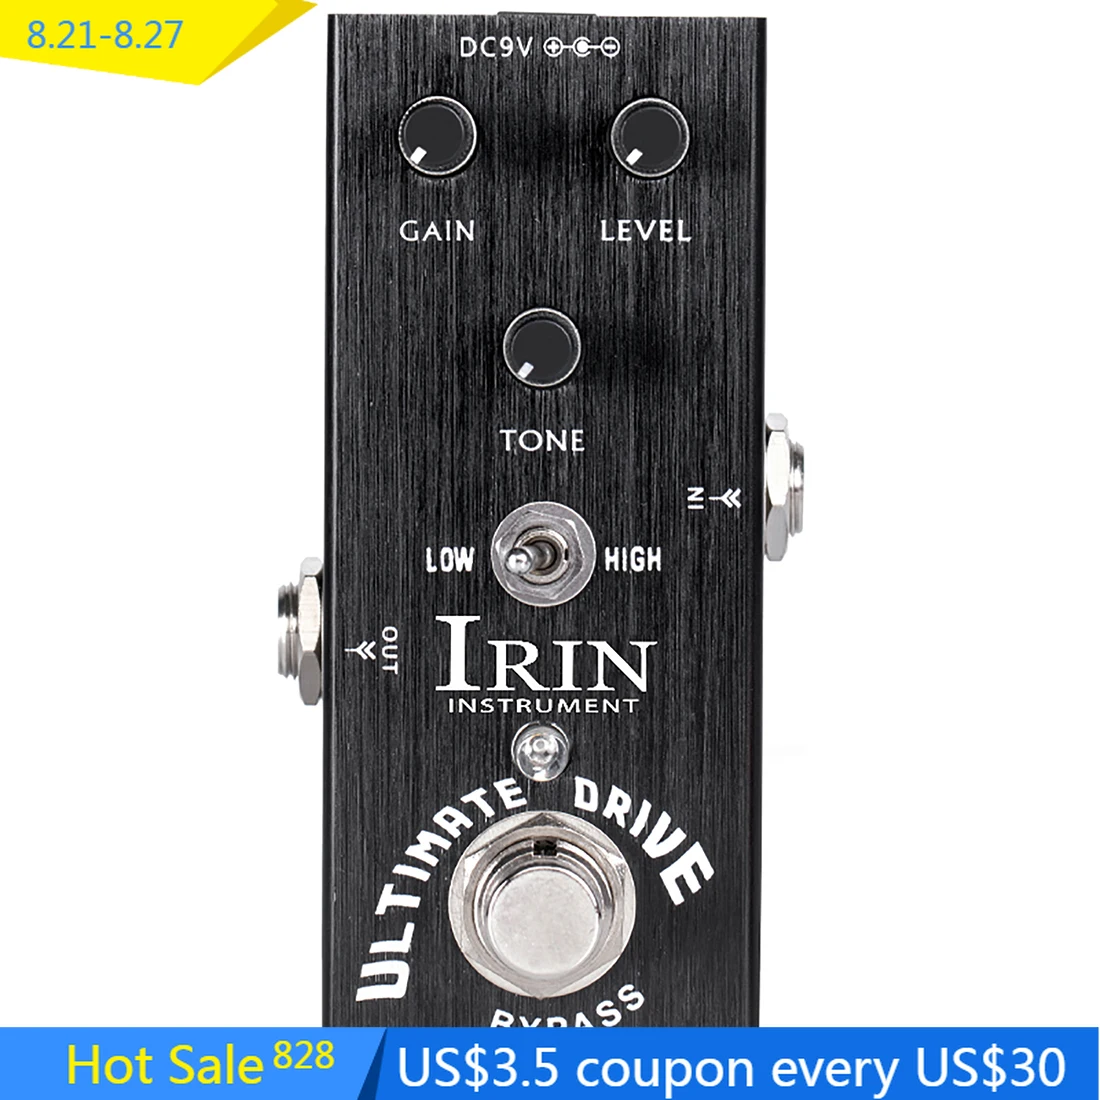 

IRIN AN-11 Ultimate Drive Guitar Effect True Bypass Bordering on Distortion Overdrive Pedal Single Guitar Parts & Accessories